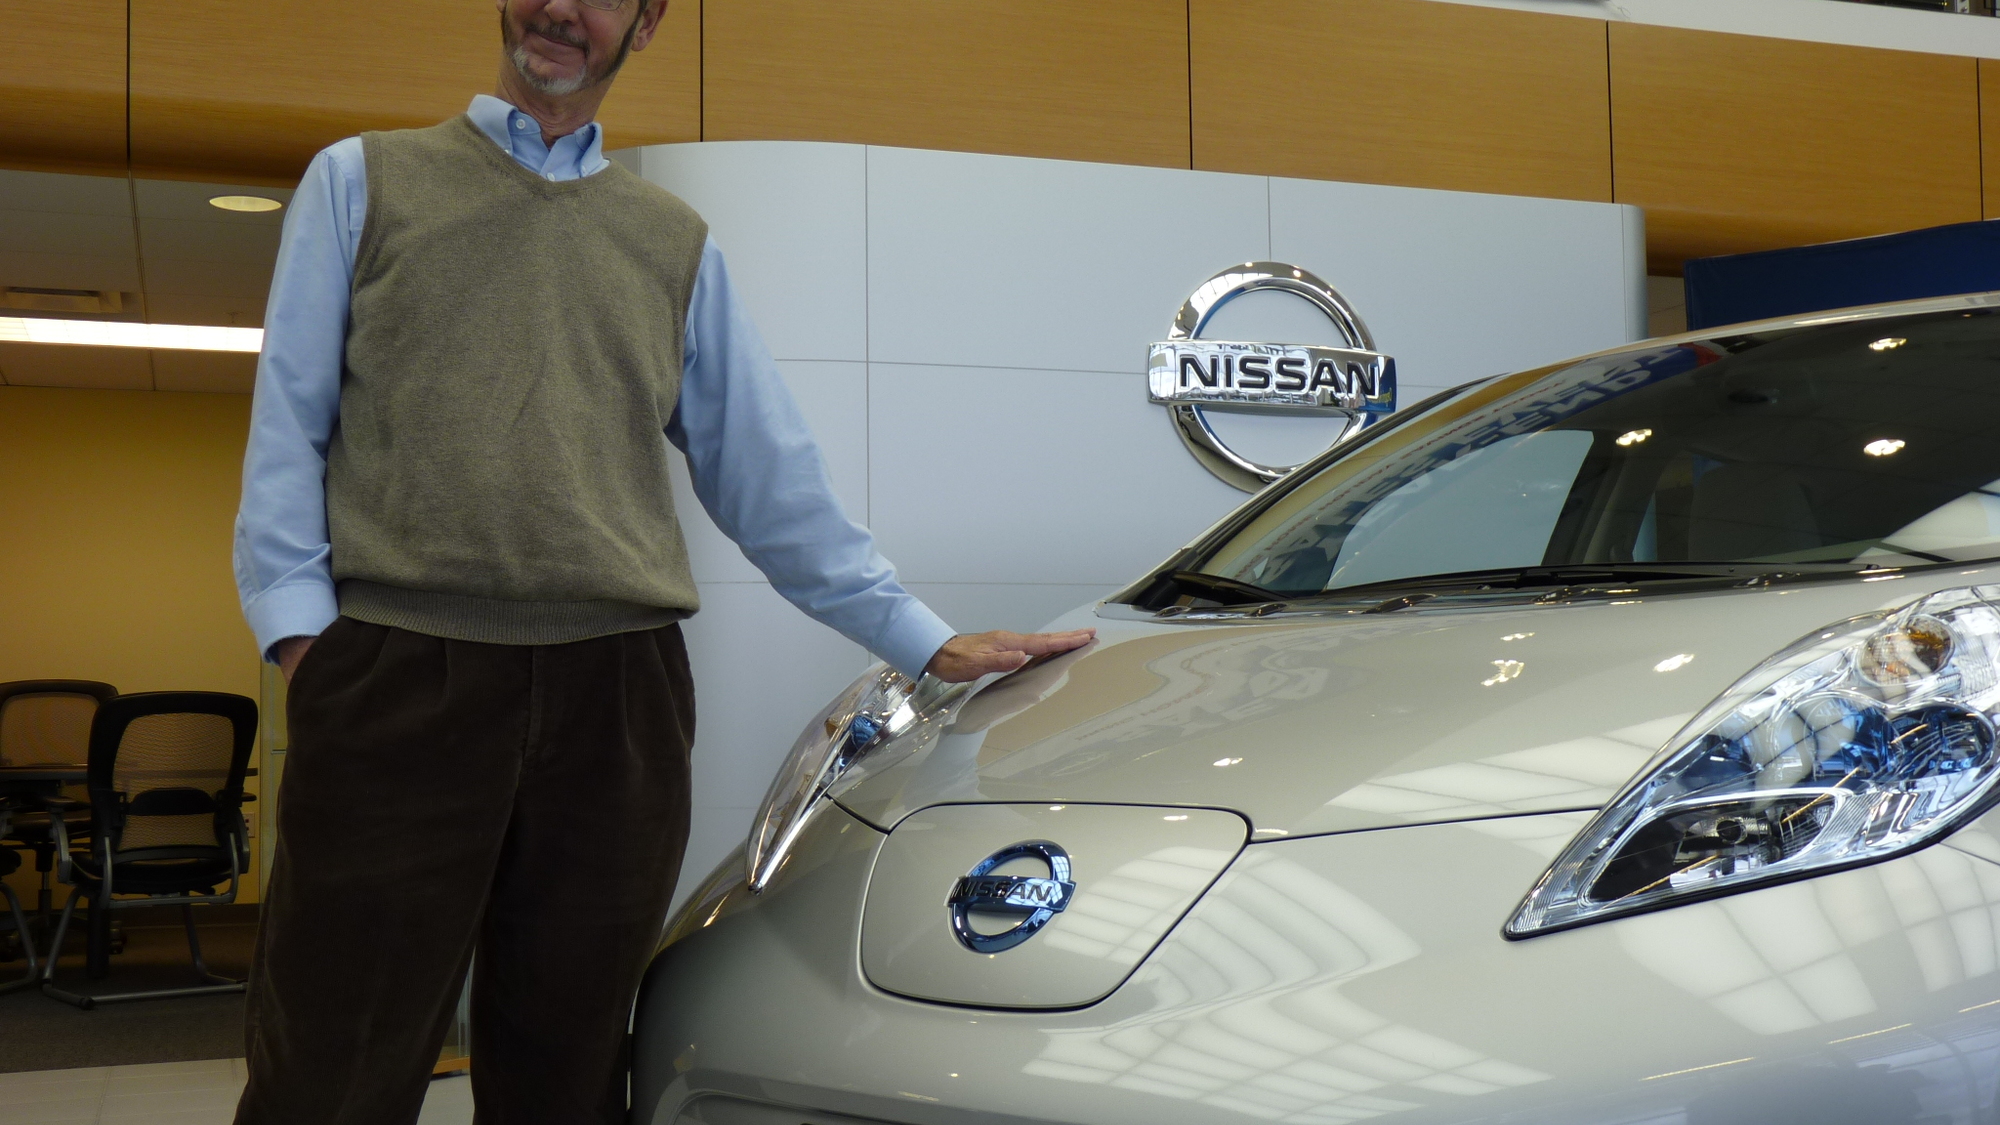 John Duncan takes delivery of one of the first 2011 Nissan LEAF EVs, near Portland OR, 12/15/2010